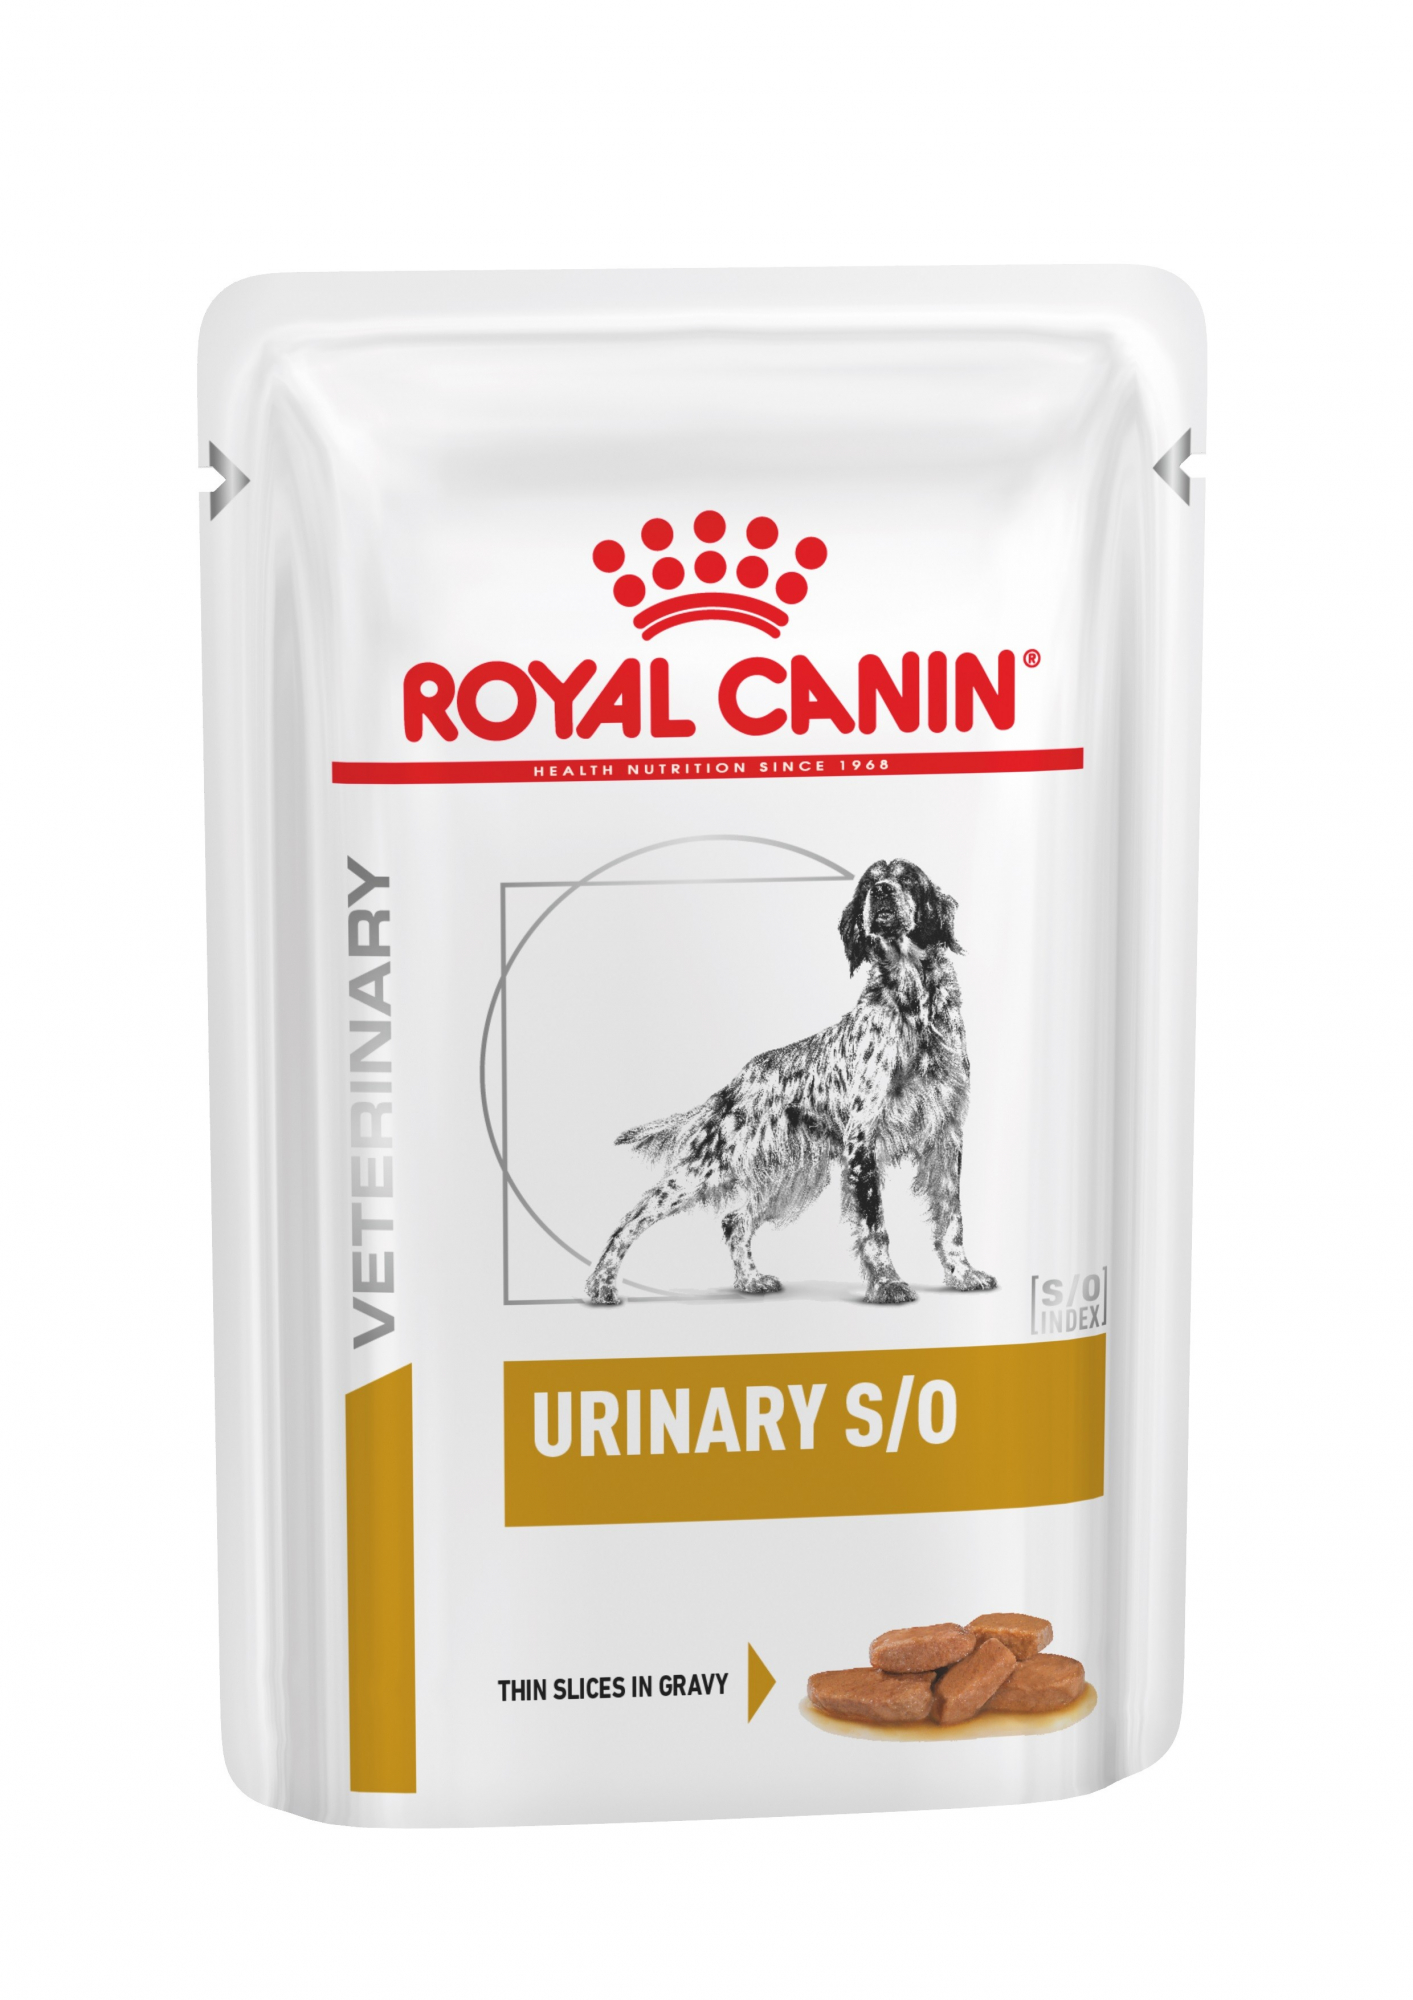 Royal Canin Veterinary Dog Urinary S/O Moderate Calorie humide